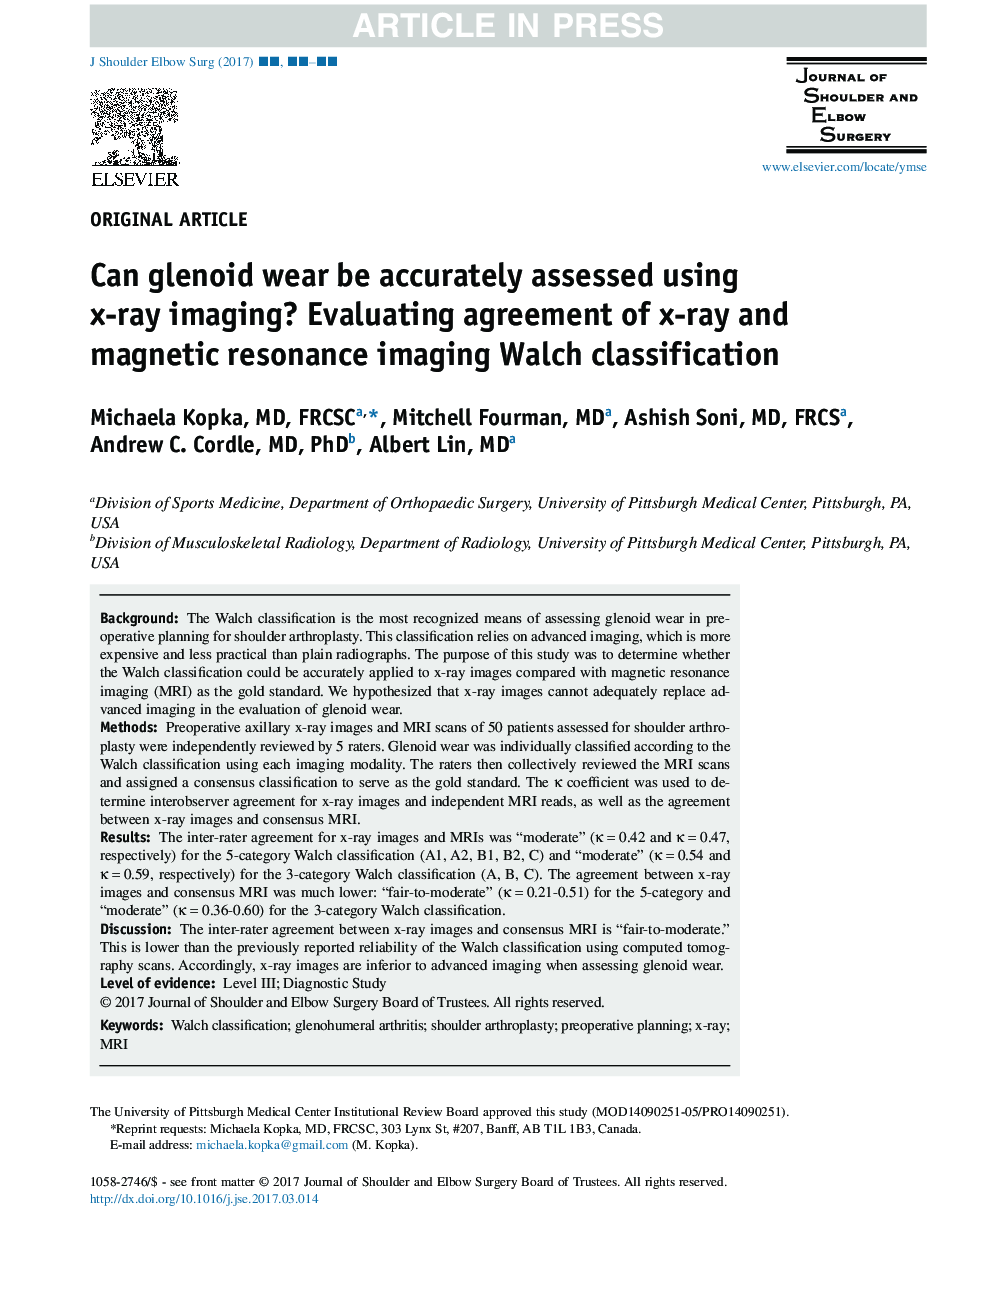 Can glenoid wear be accurately assessed using x-ray imaging? Evaluating agreement of x-ray and magnetic resonance imaging (MRI) Walch classification